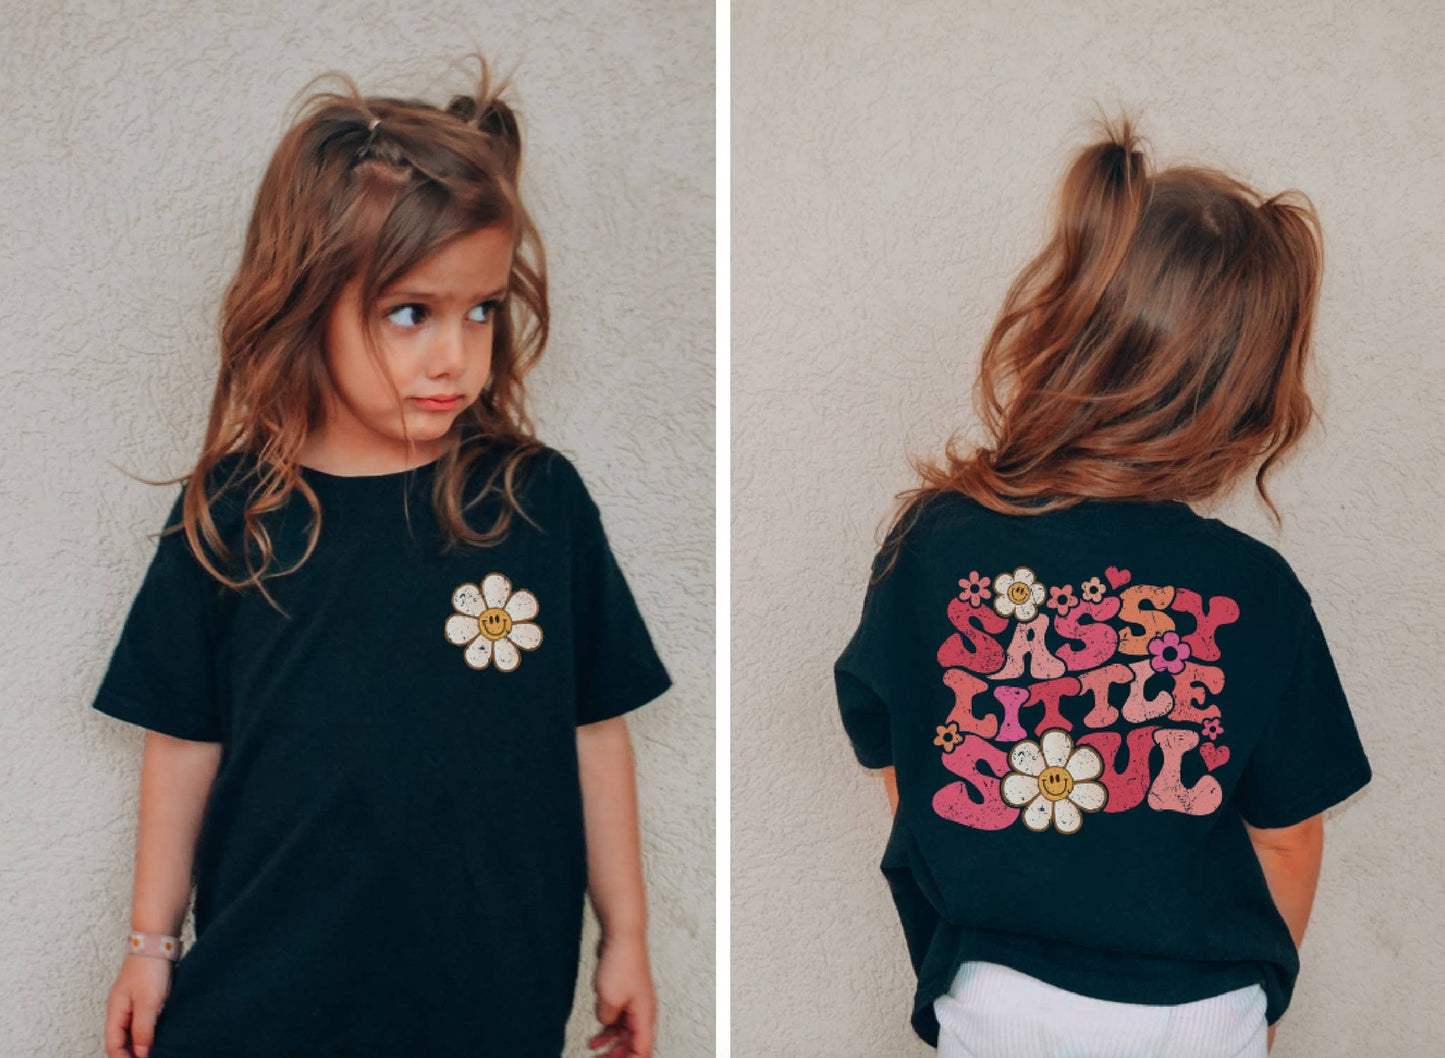 Squishy Faces - Sassy Little Soul Kids Tee